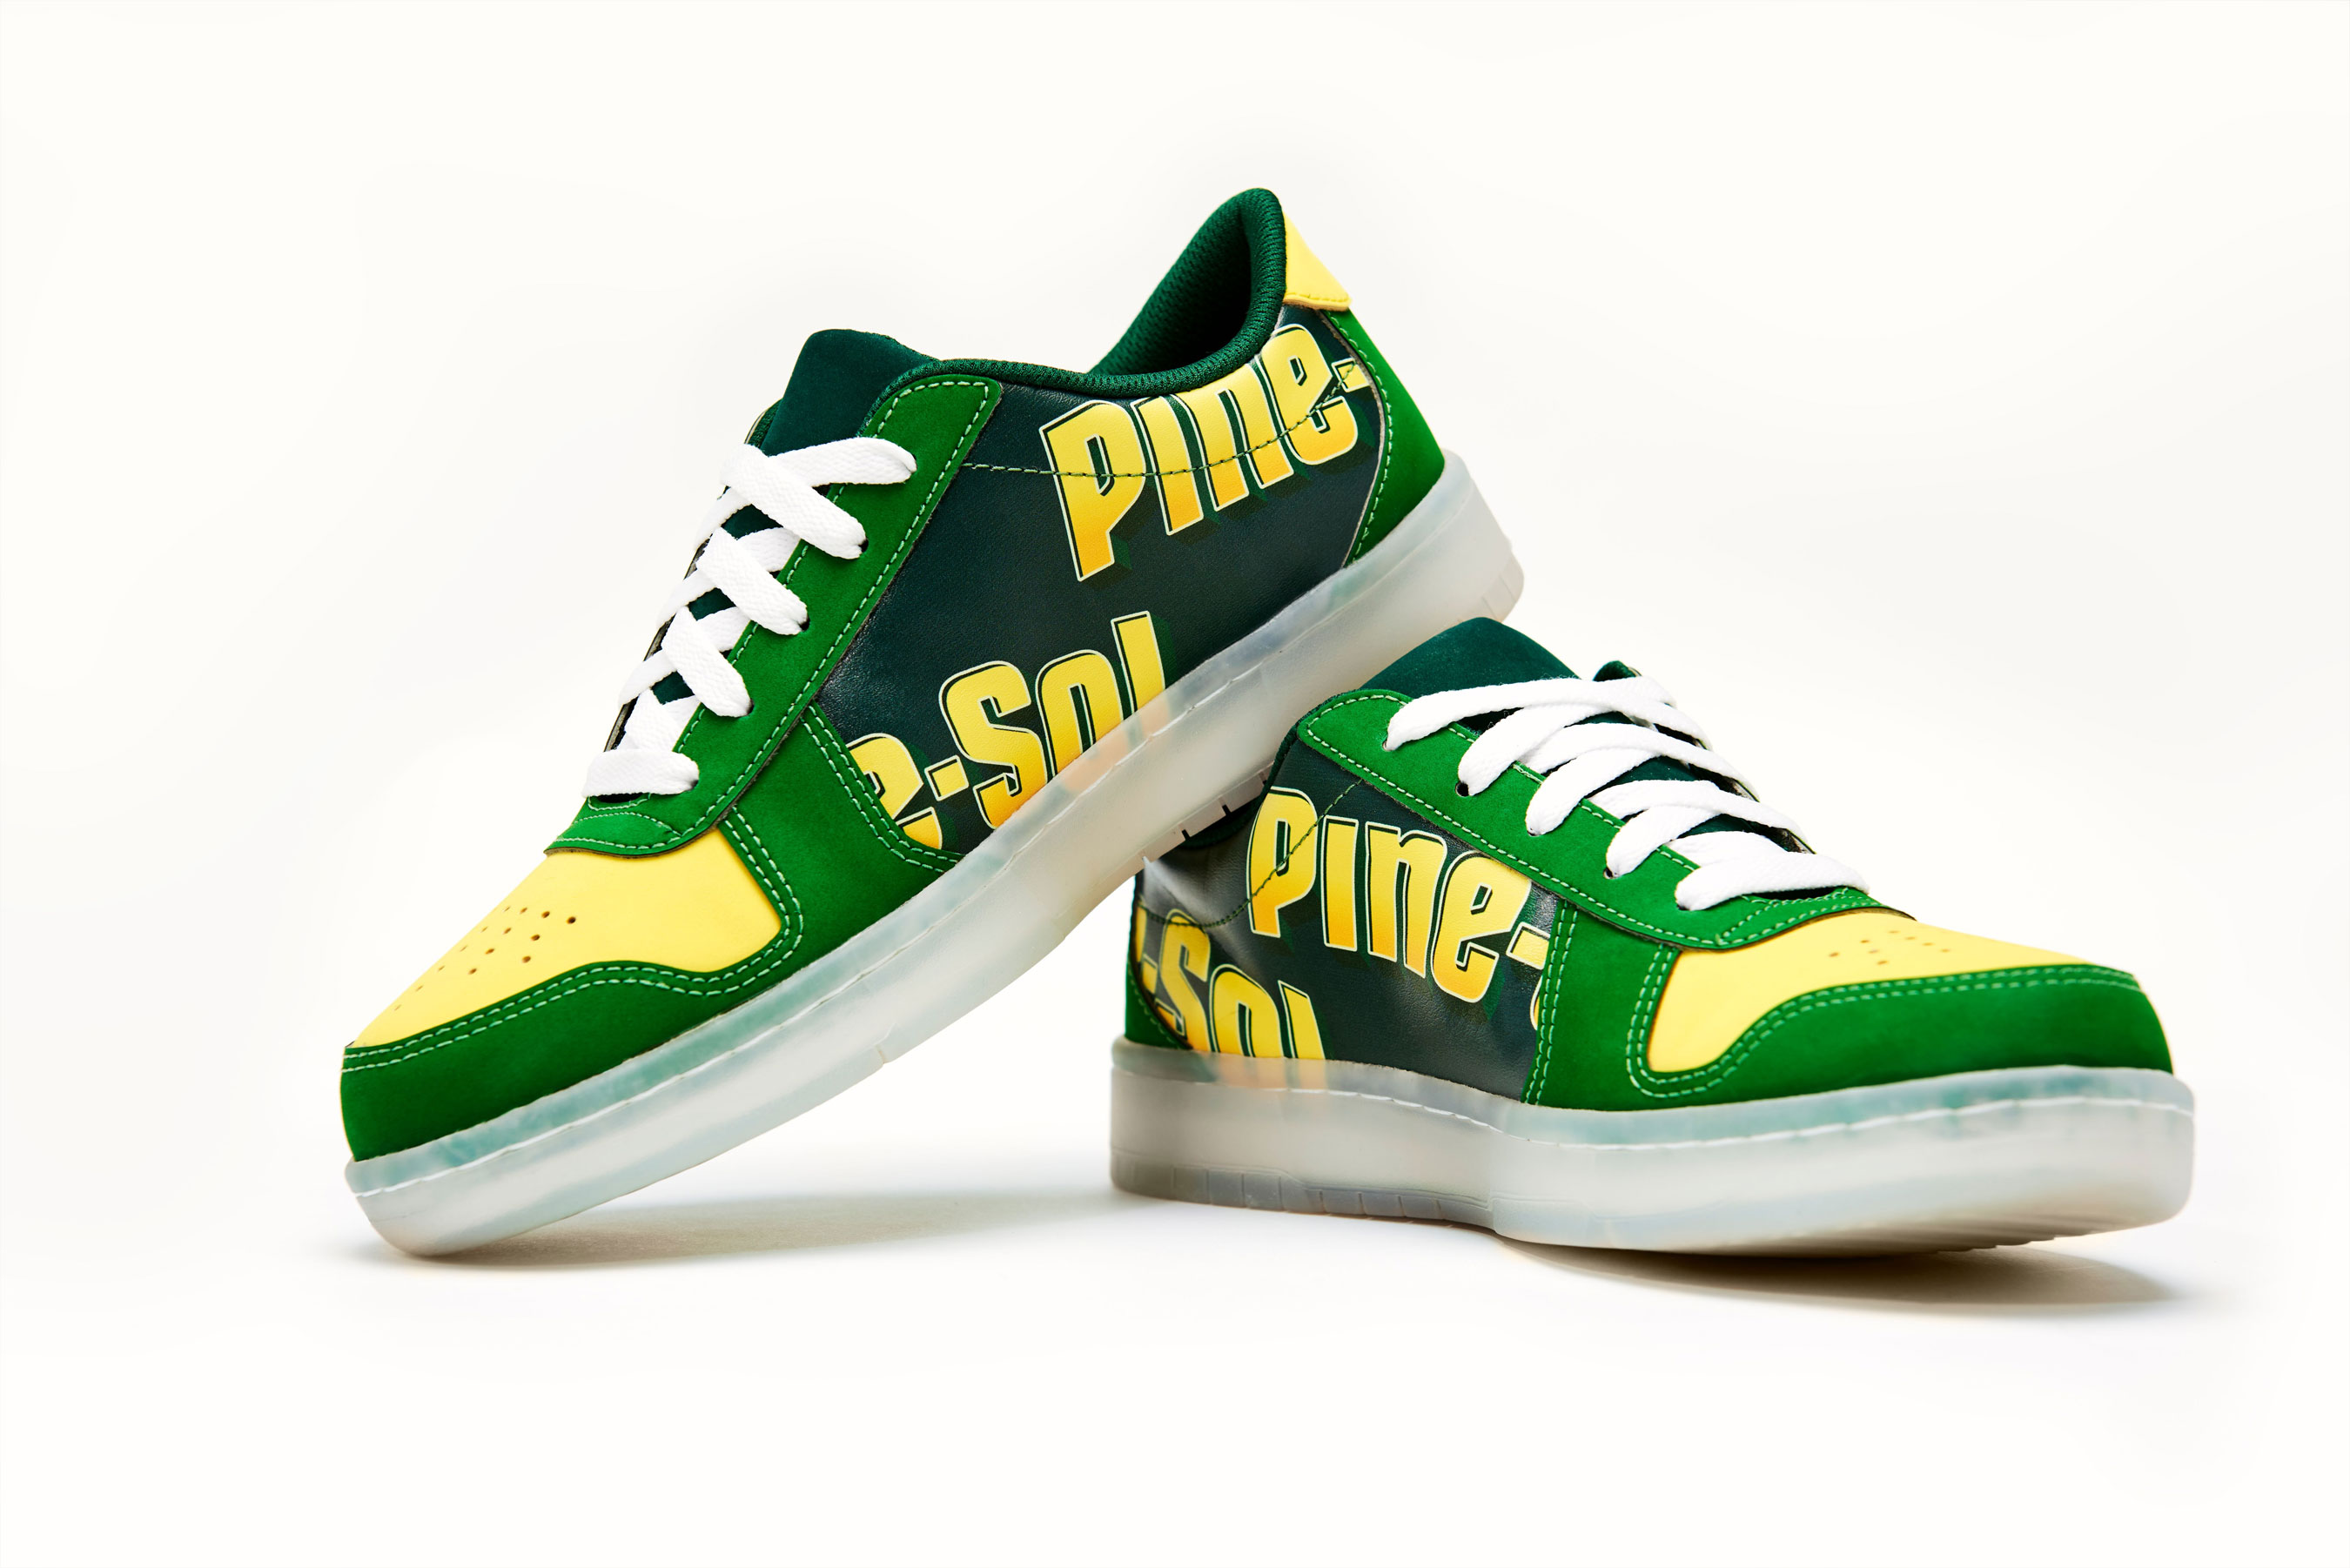 Designed with the iconic Pine-Sol™ green and yellow color scheme these kicks are sure to spark nostalgia for all brand fans.